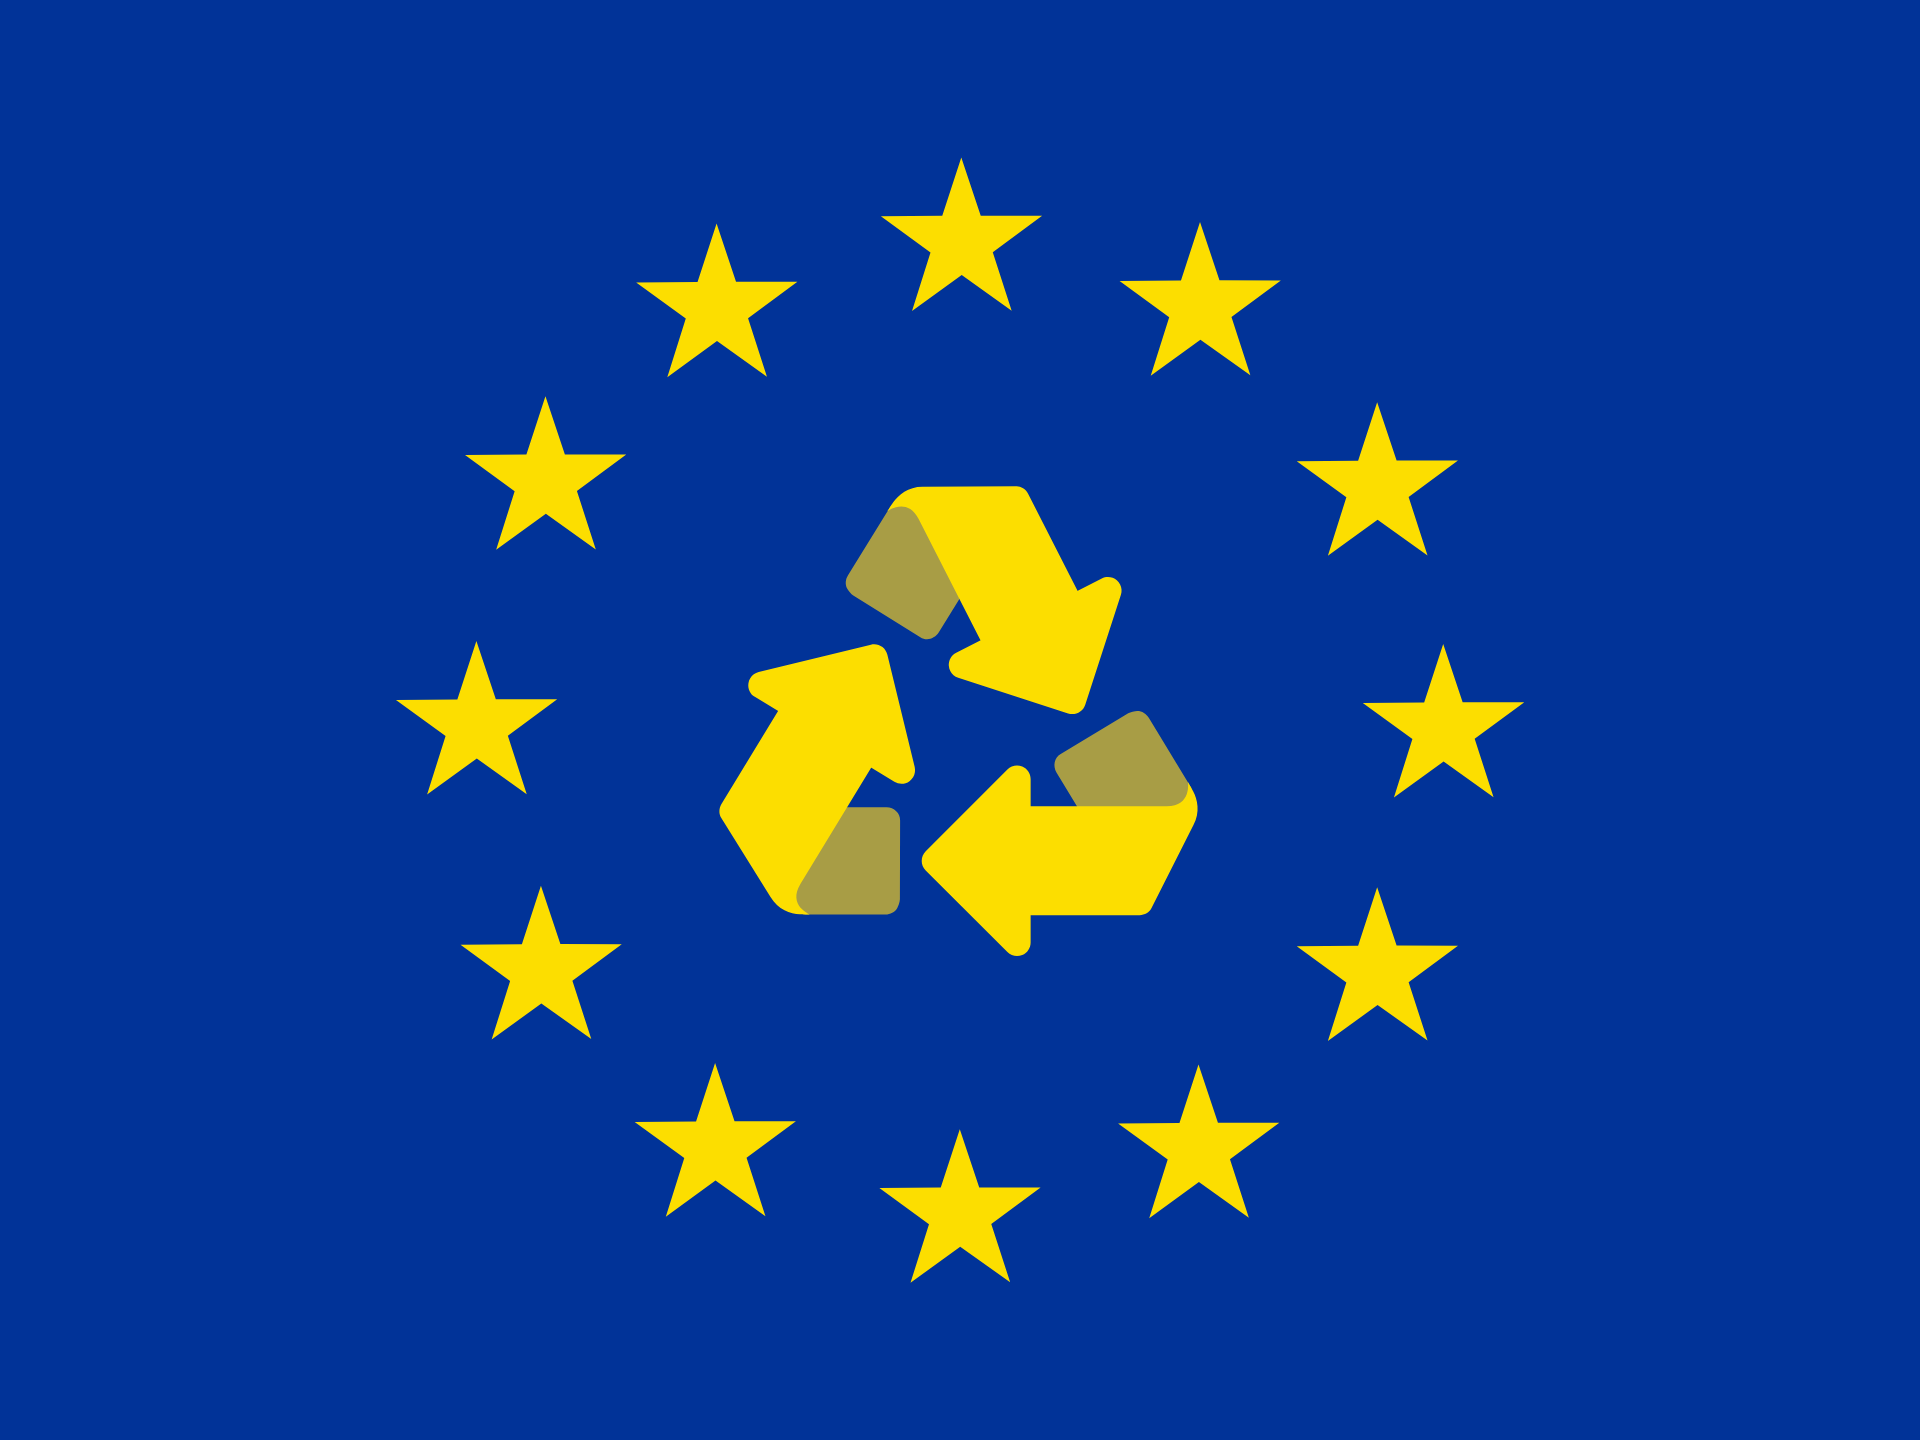 The European Union flag with the recycling icon in the middle following the same color scheme